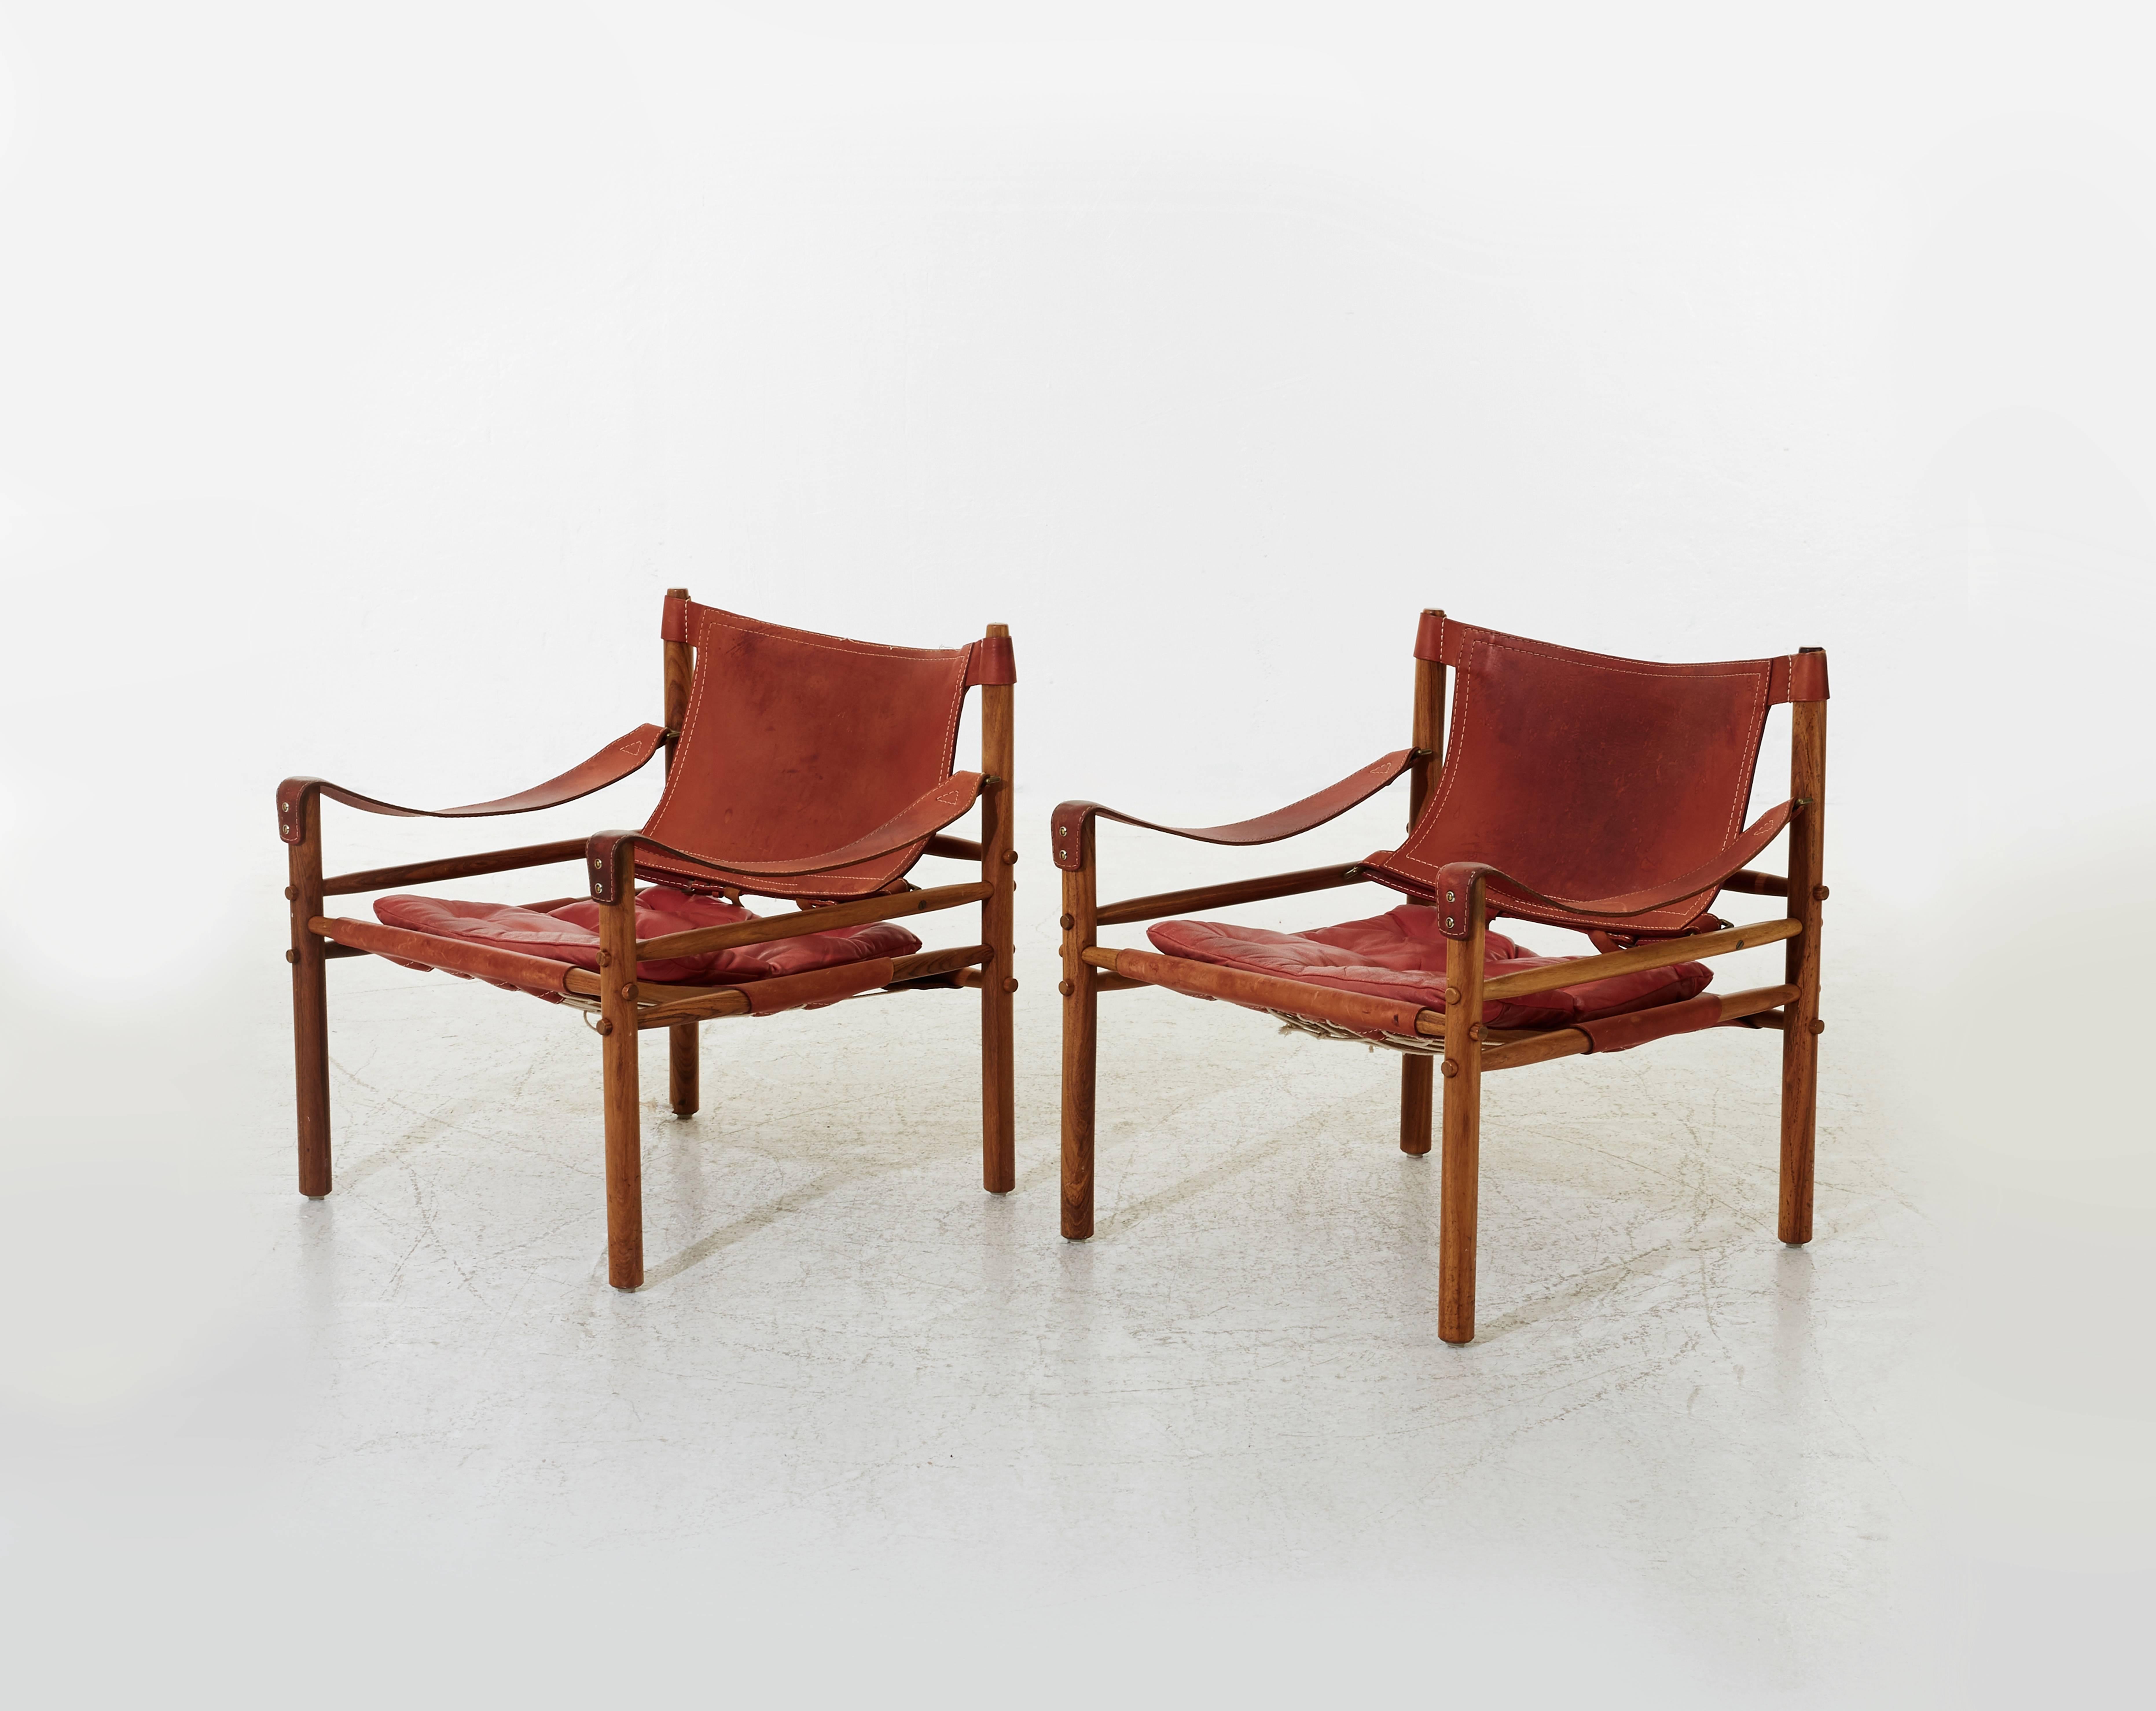 A stunning pair of authentic vintage Arne Norell safari sirocco chair in rosewood and rare red leather. Made by Norell Mobler in Sweden.

Ships worldwide.  The chairs will need to be disassembled for shipping but were designed to be taken apart and